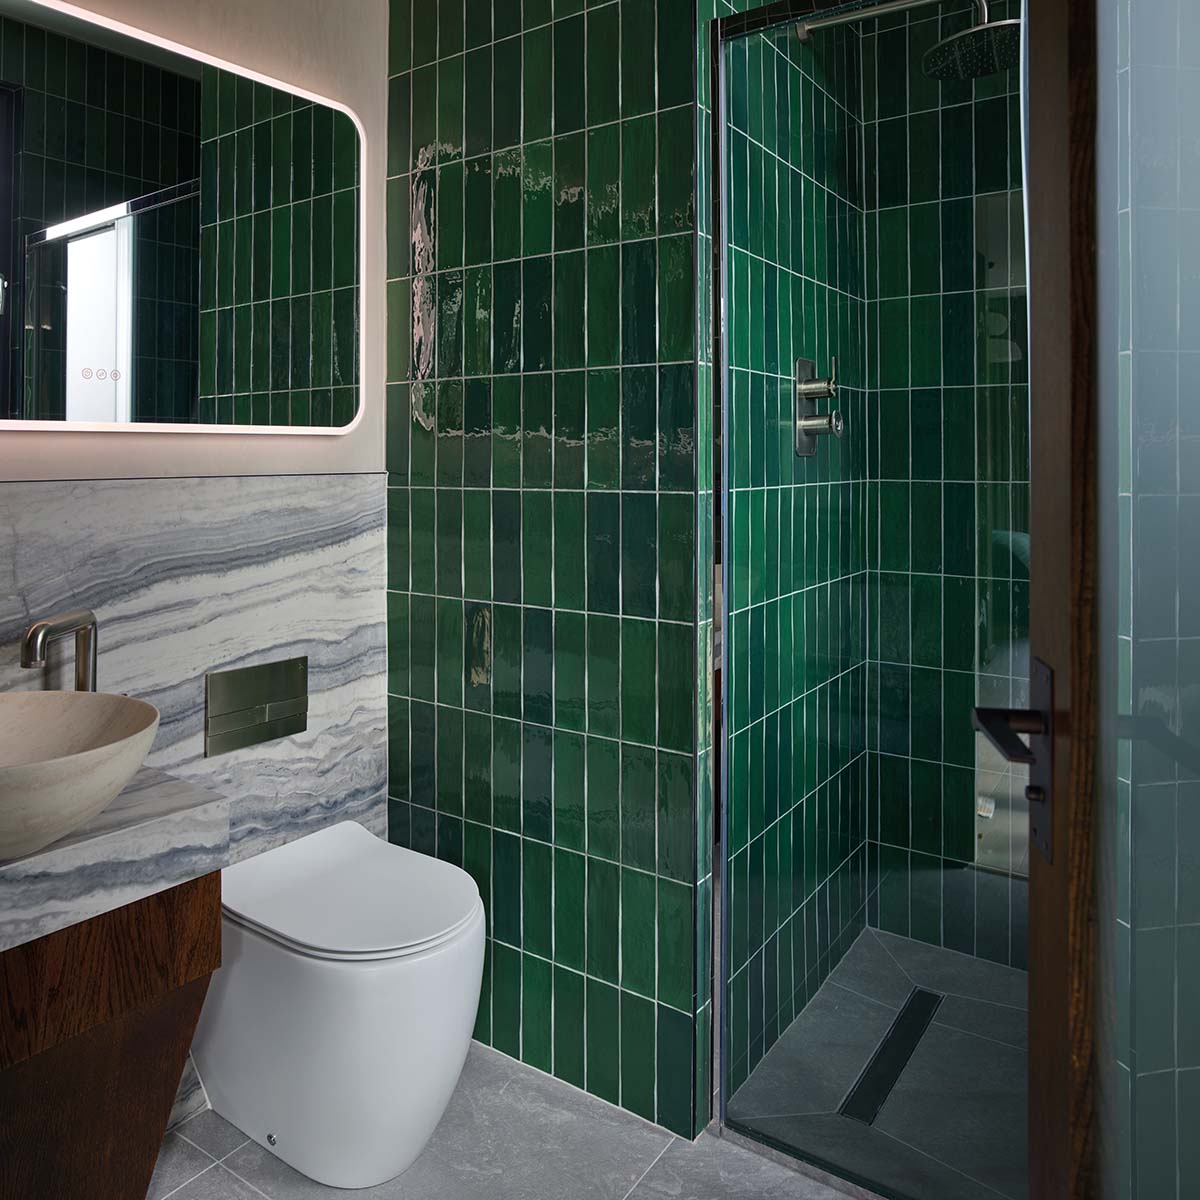 Green tiles in a beautiful bathroom. Miller's Cottage in Hamilton, South Lanarkshire